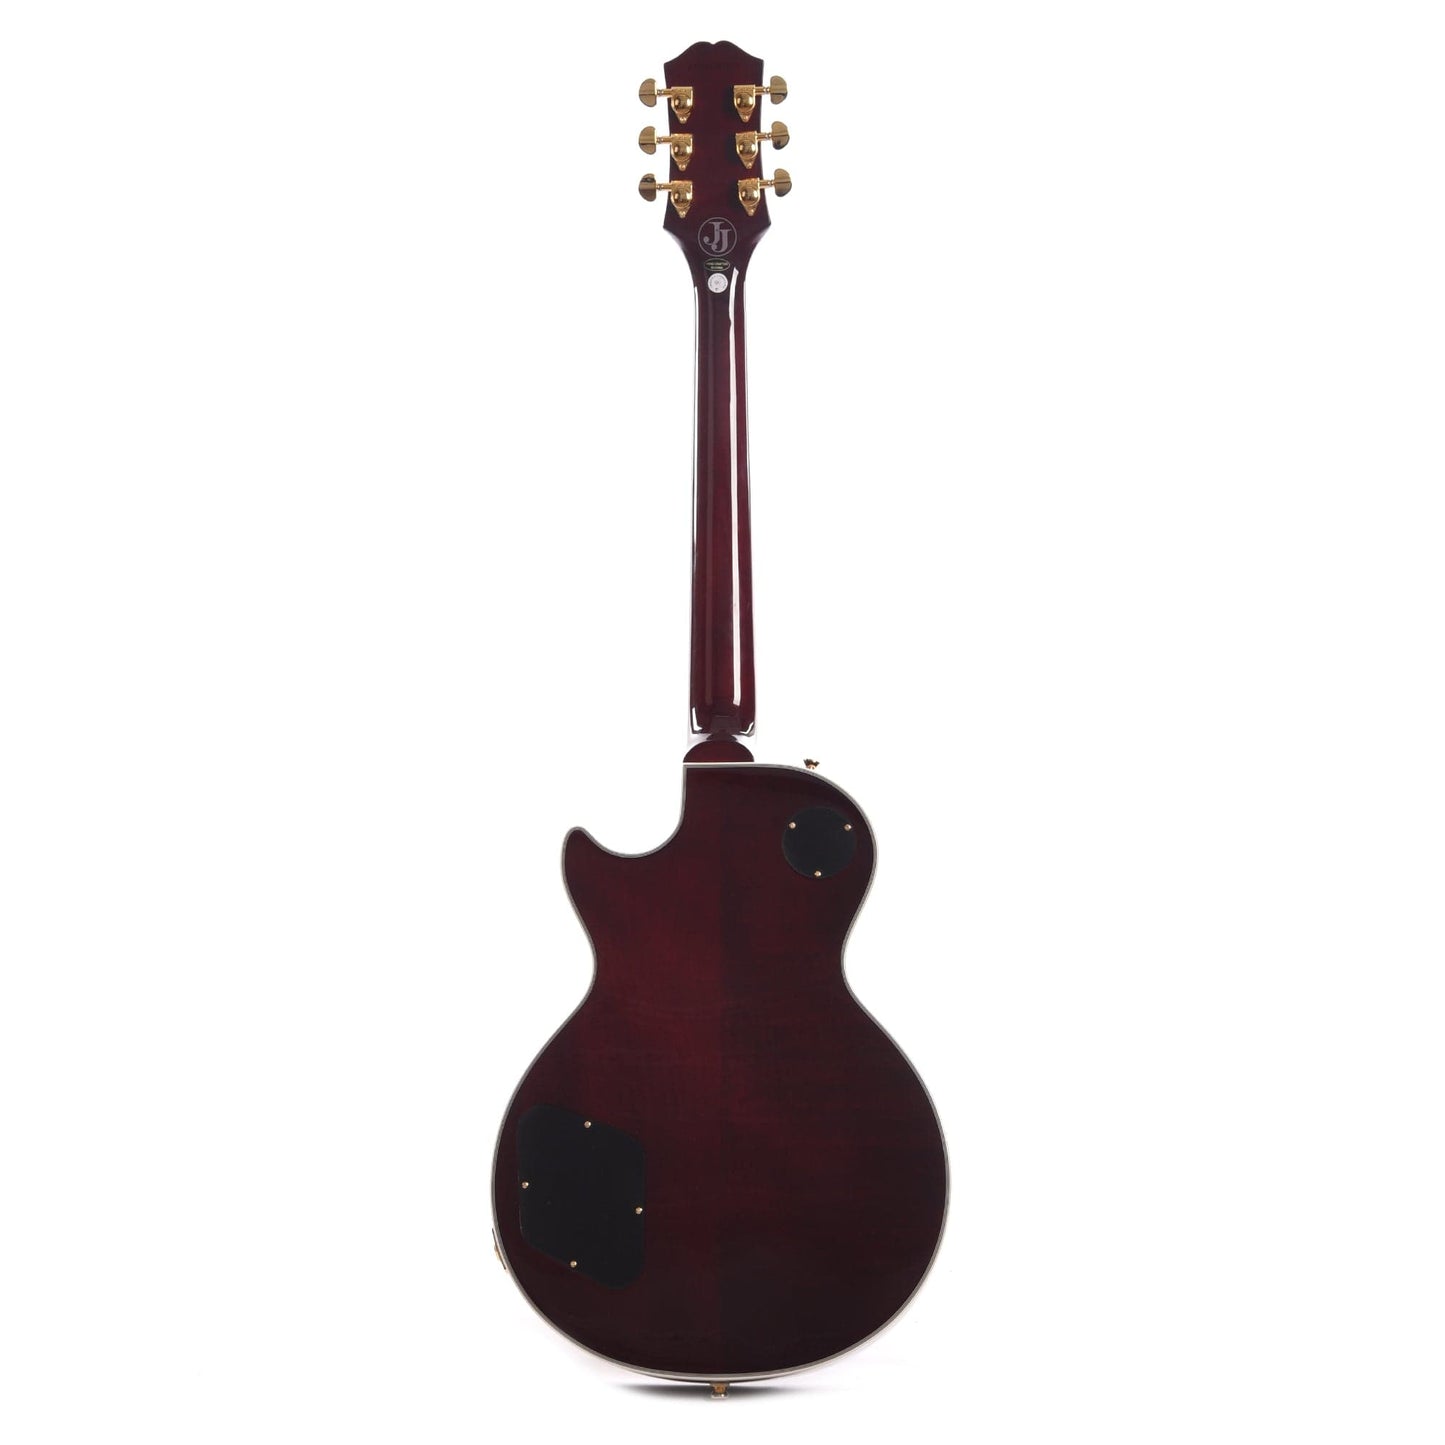 Epiphone Jerry Cantrell Signature "Wino" Les Paul Custom Wine Red